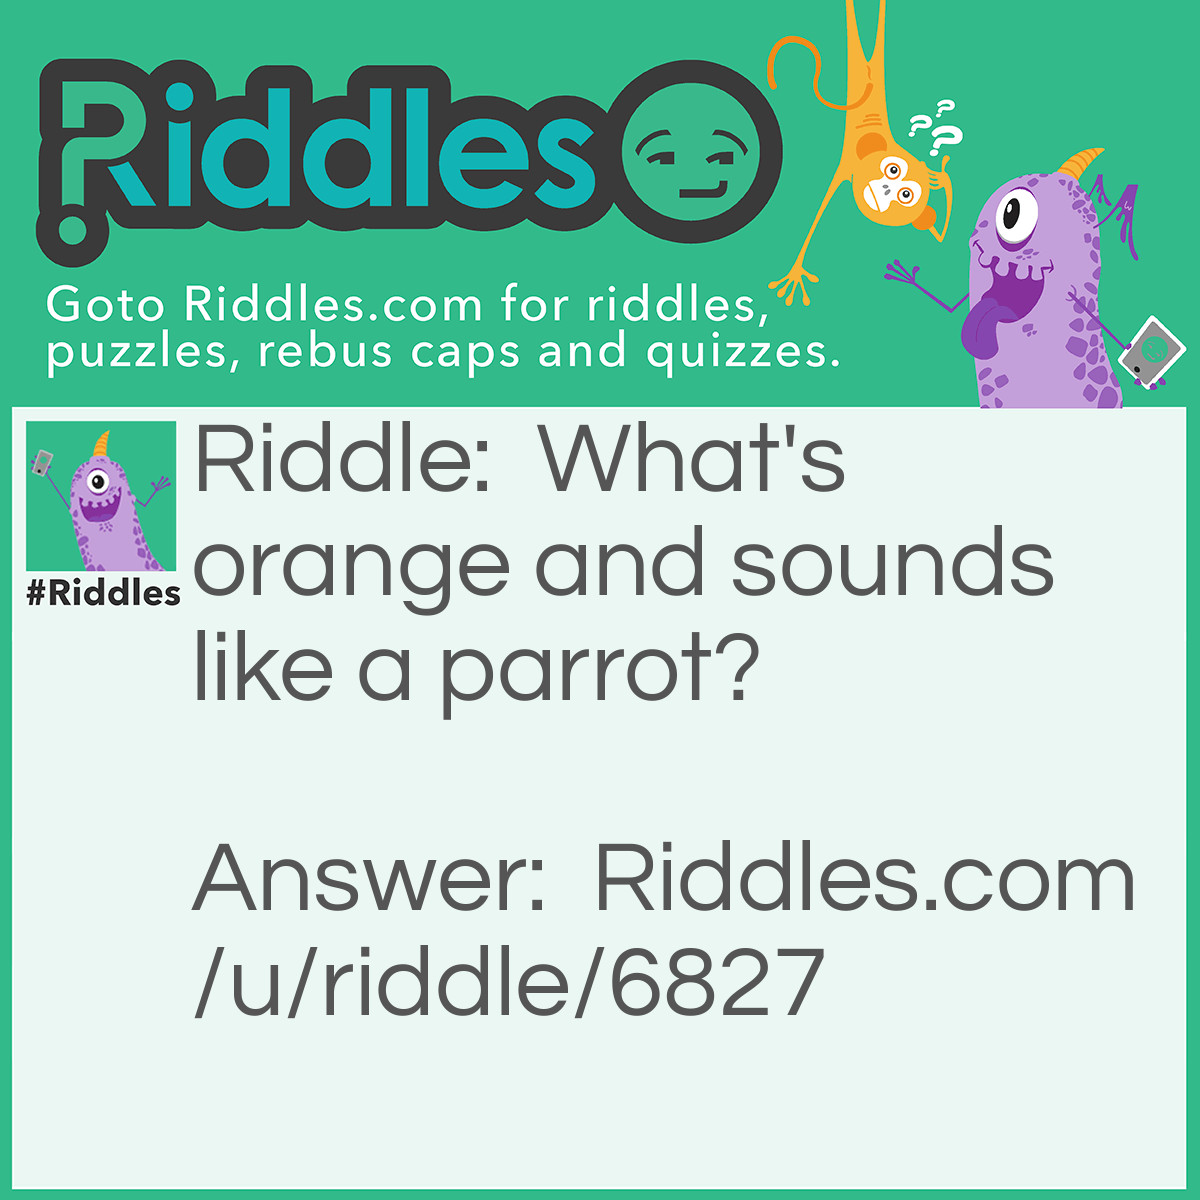 Riddle: What's orange and sounds like a parrot? Answer: 'A carrot'.